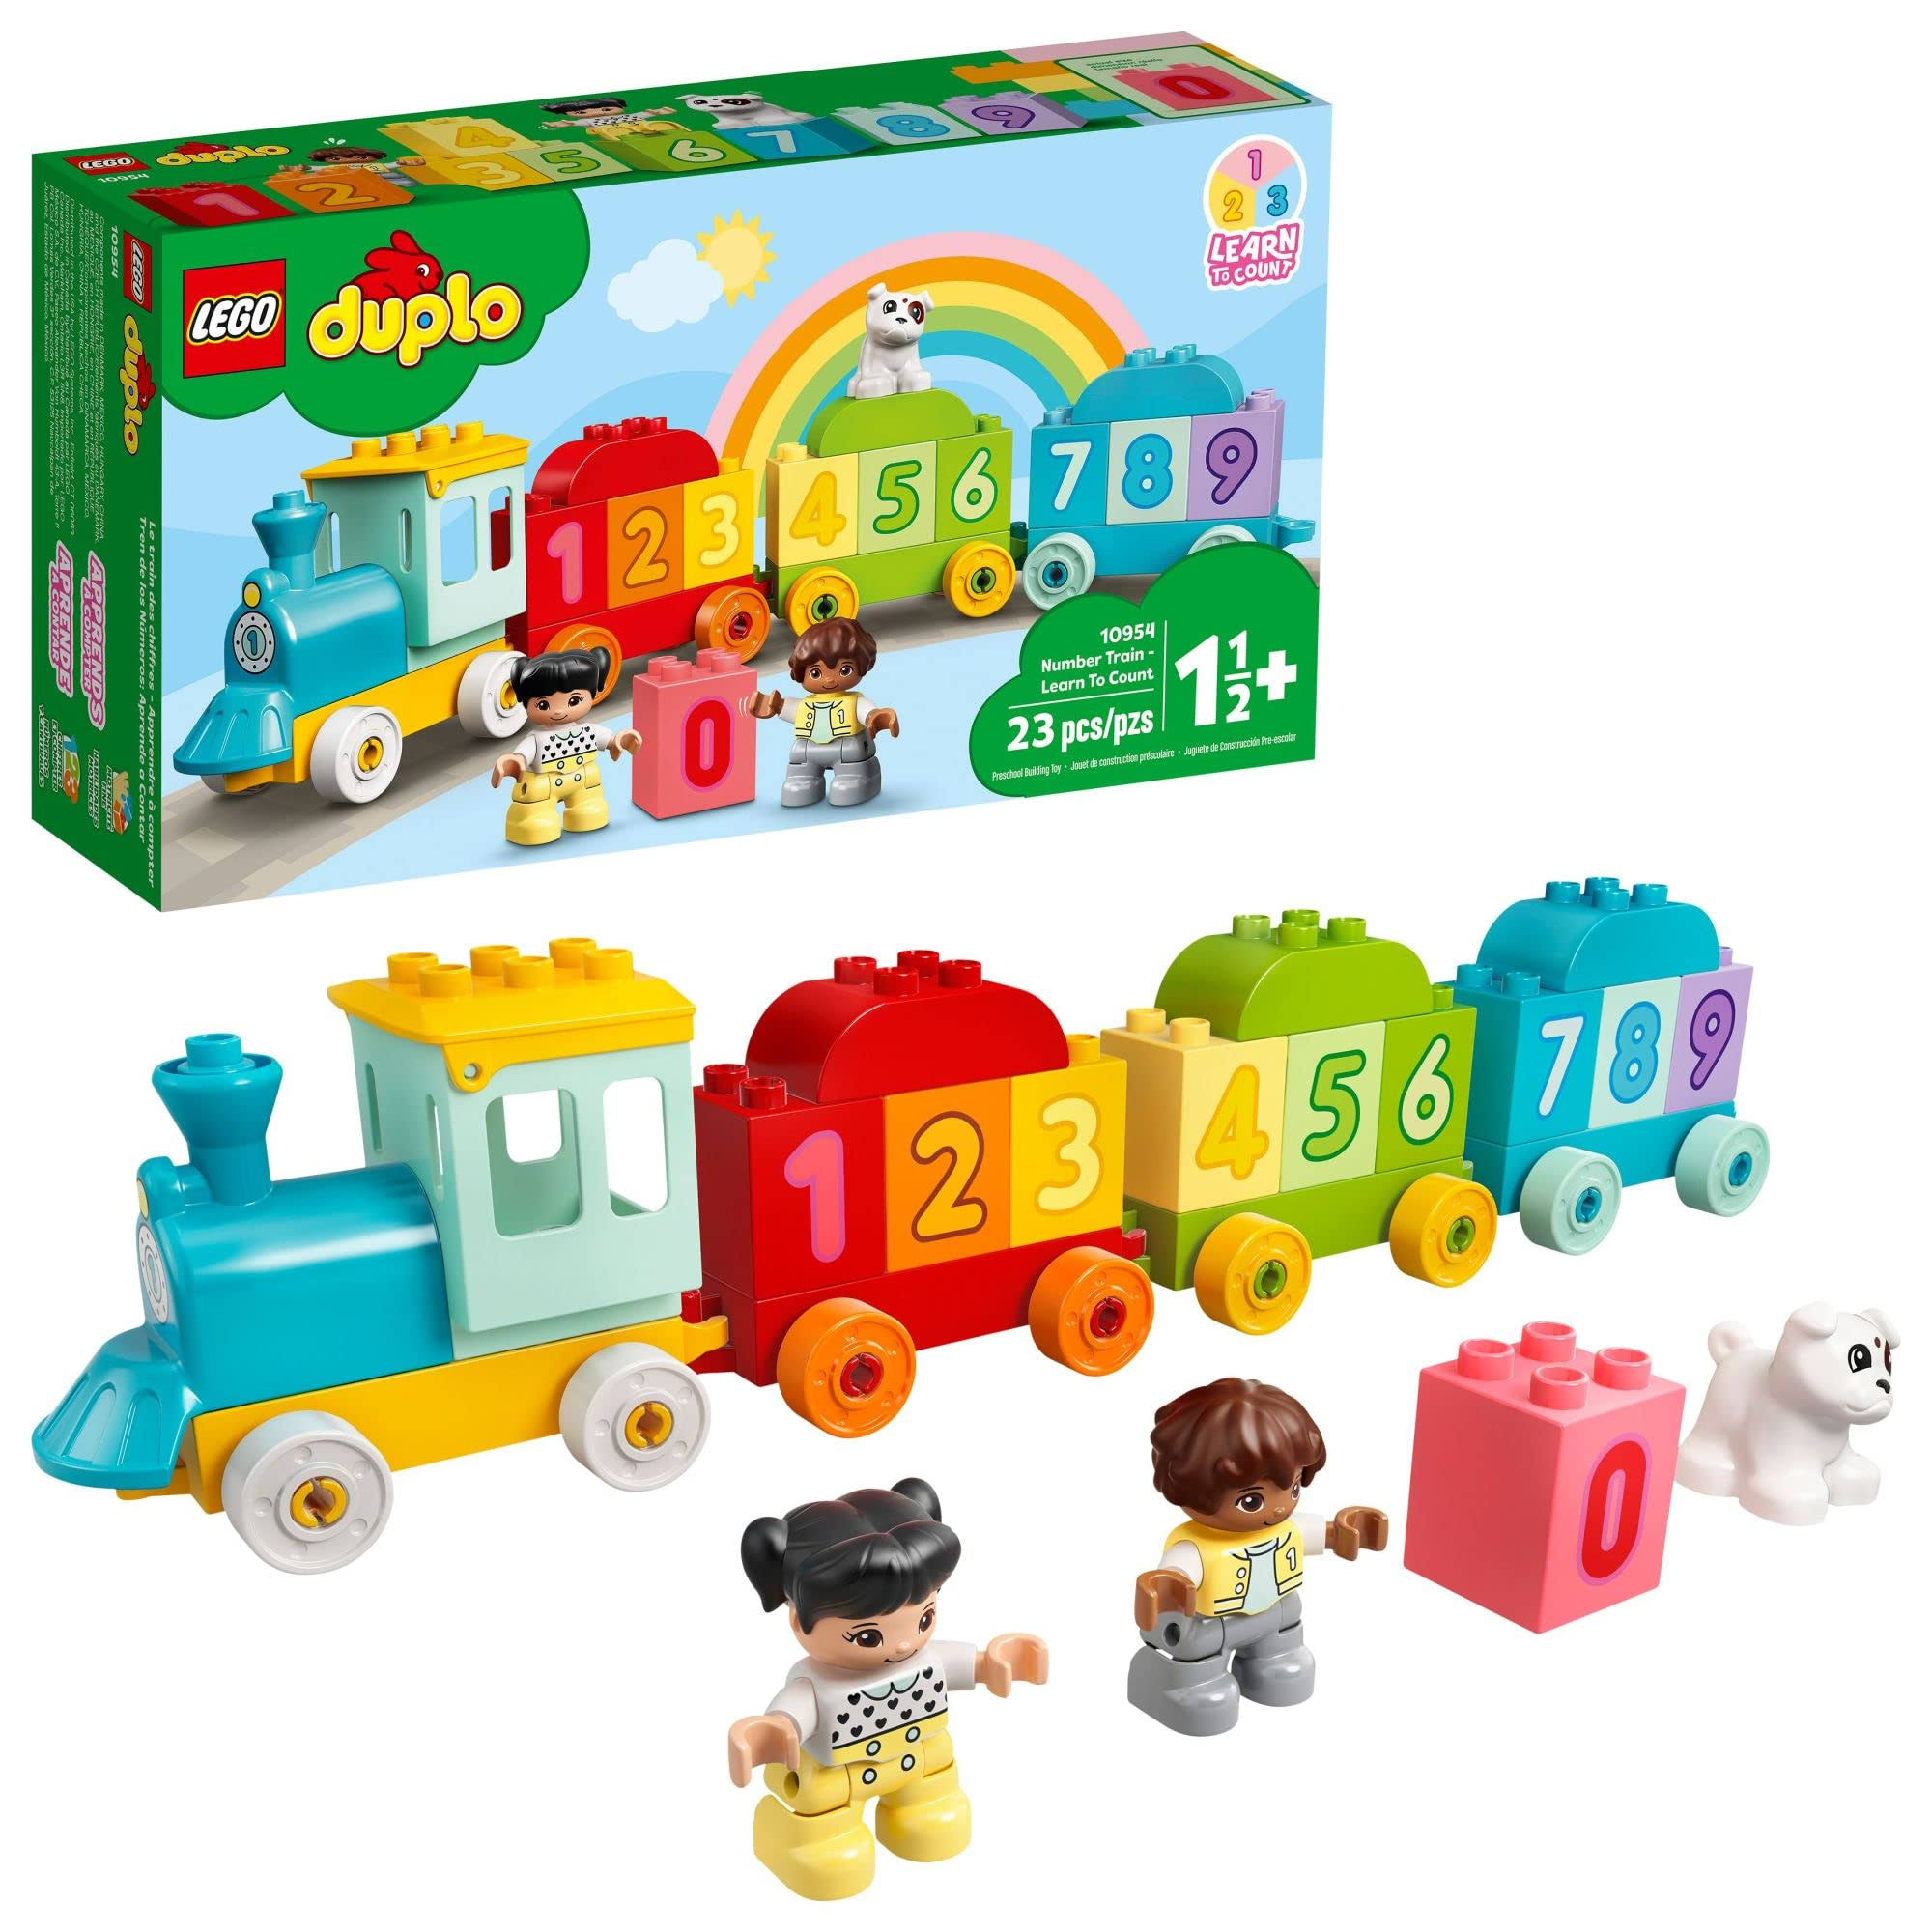 LEGO Duplo My First Number Train Learn to Count 10954 Building Toy 23 Pieces